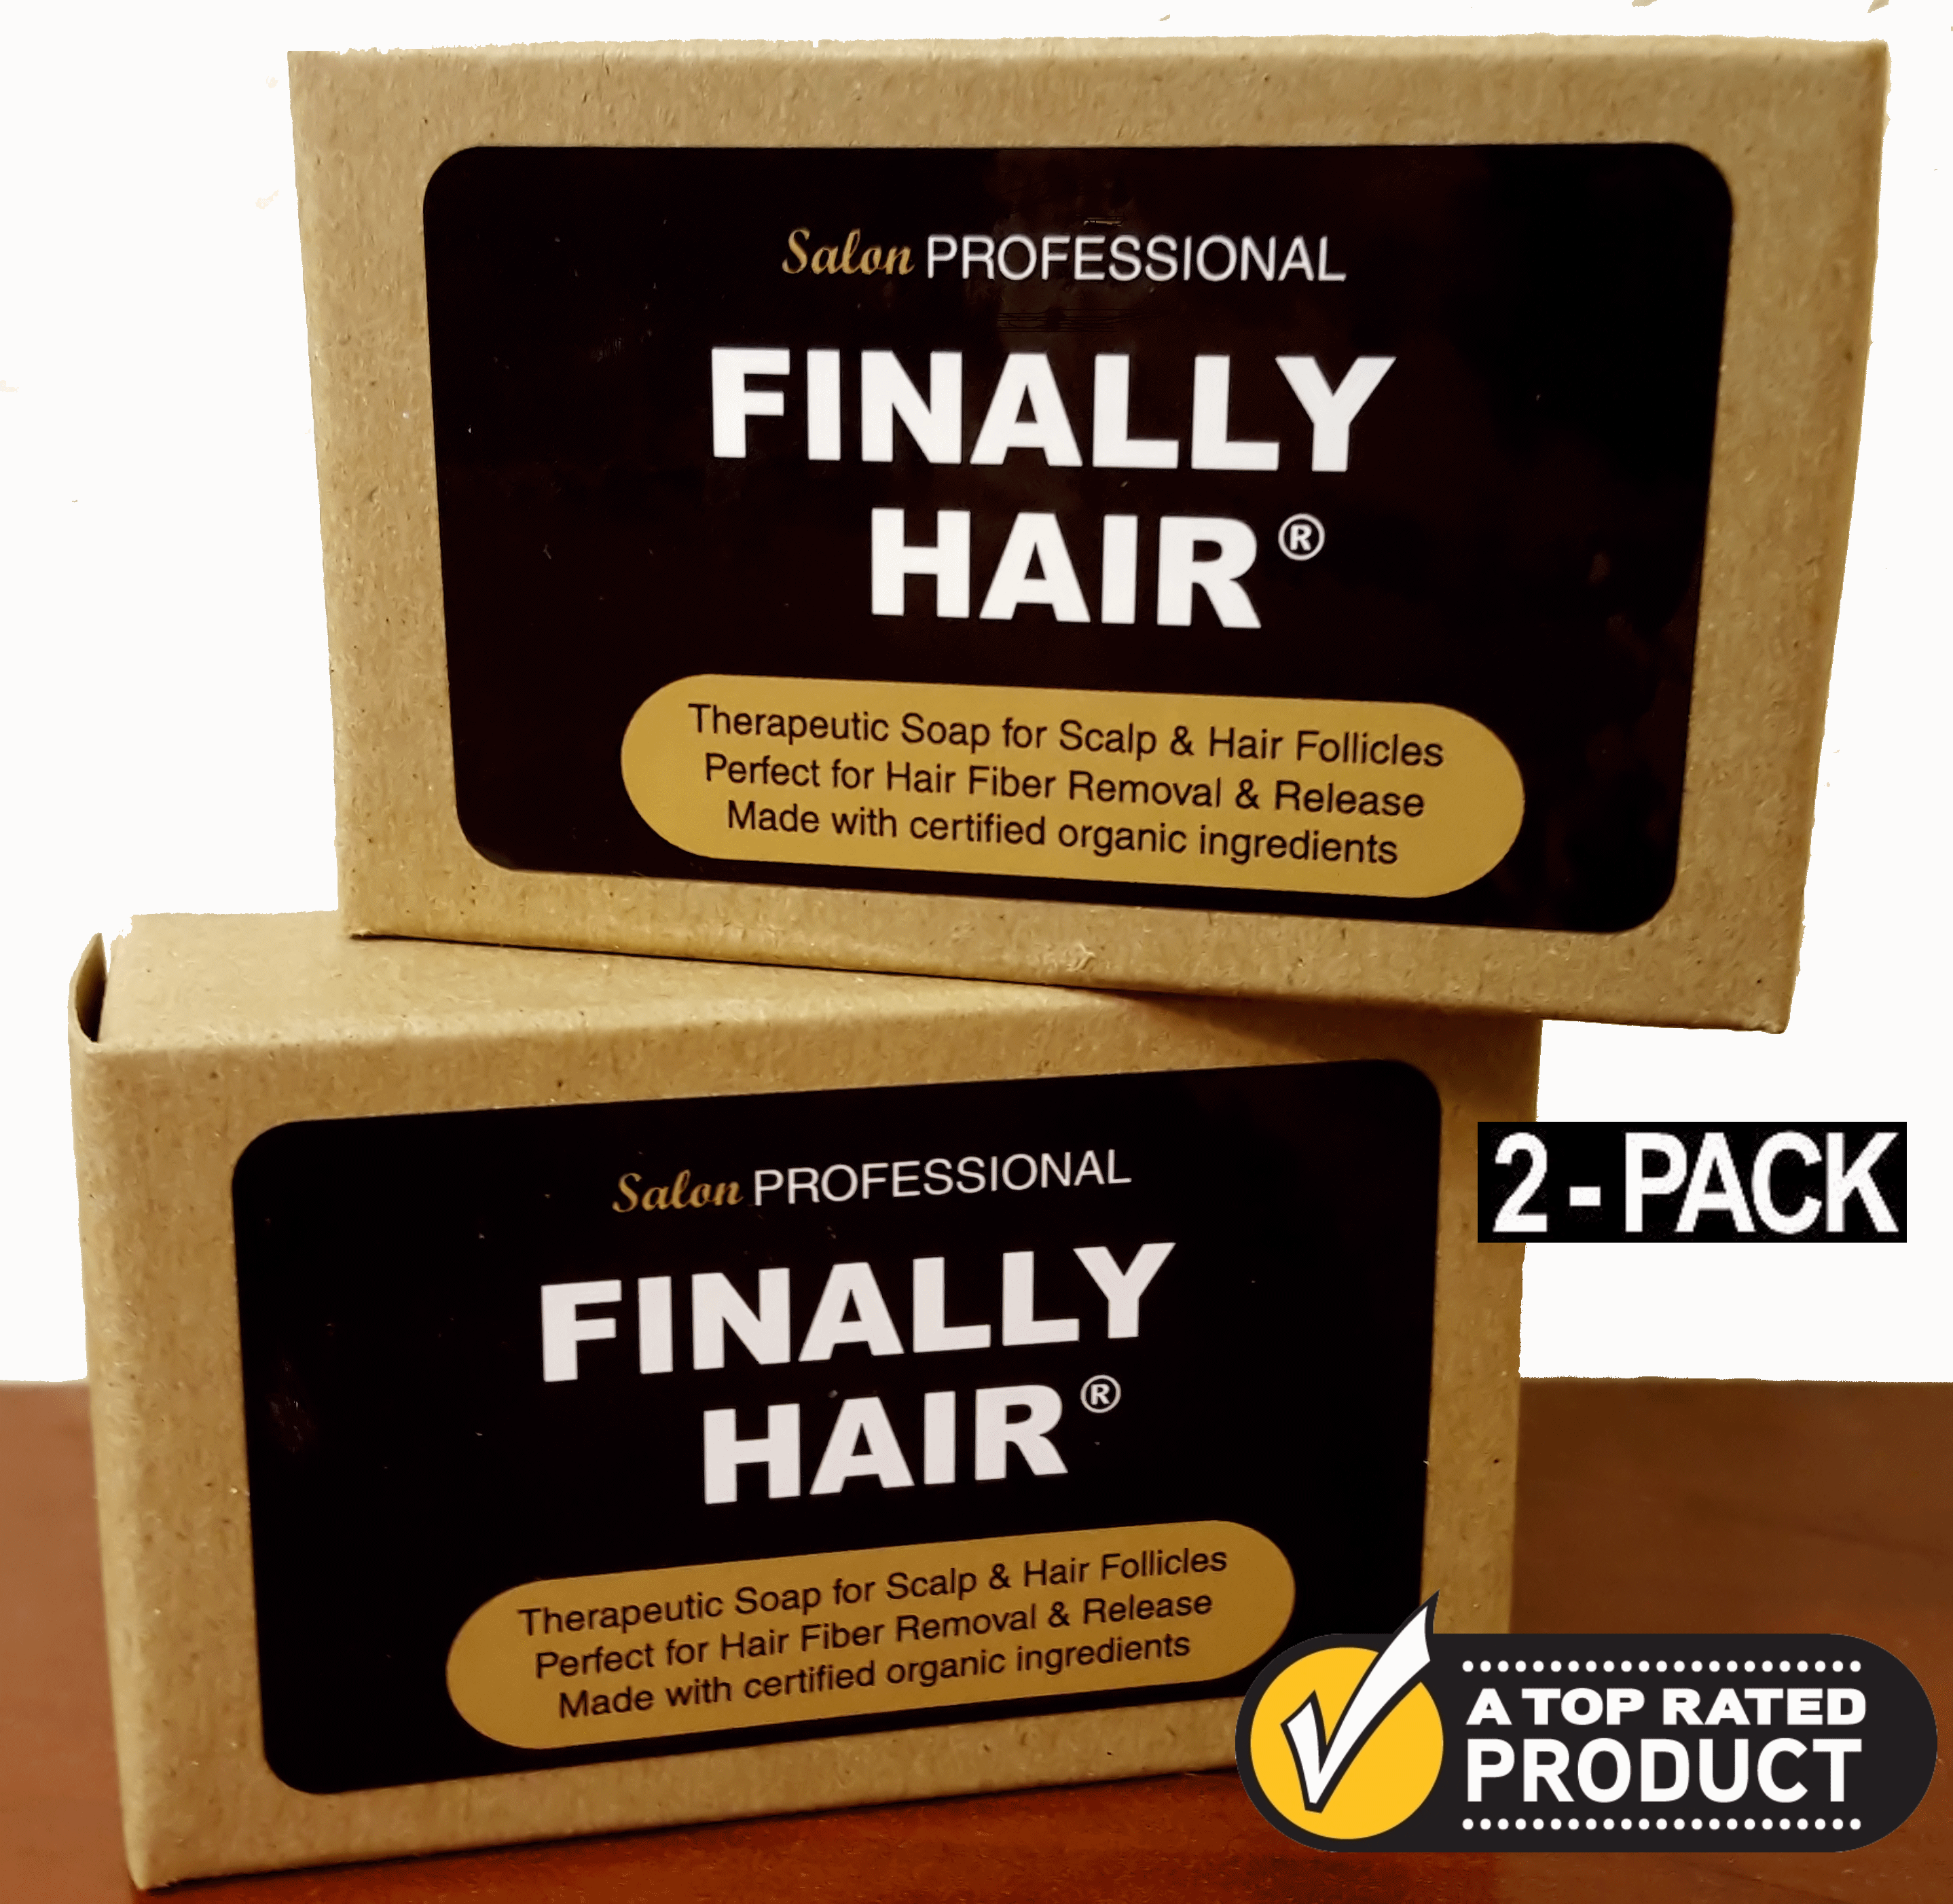 Hair Loss Shampoo Conditioner Soap Healthy Hair Therapy Bars [Soap 2 Pack]  - $ : hair building fiber - Finally Hair®, Hair Building Fiber -  Finally Hair®